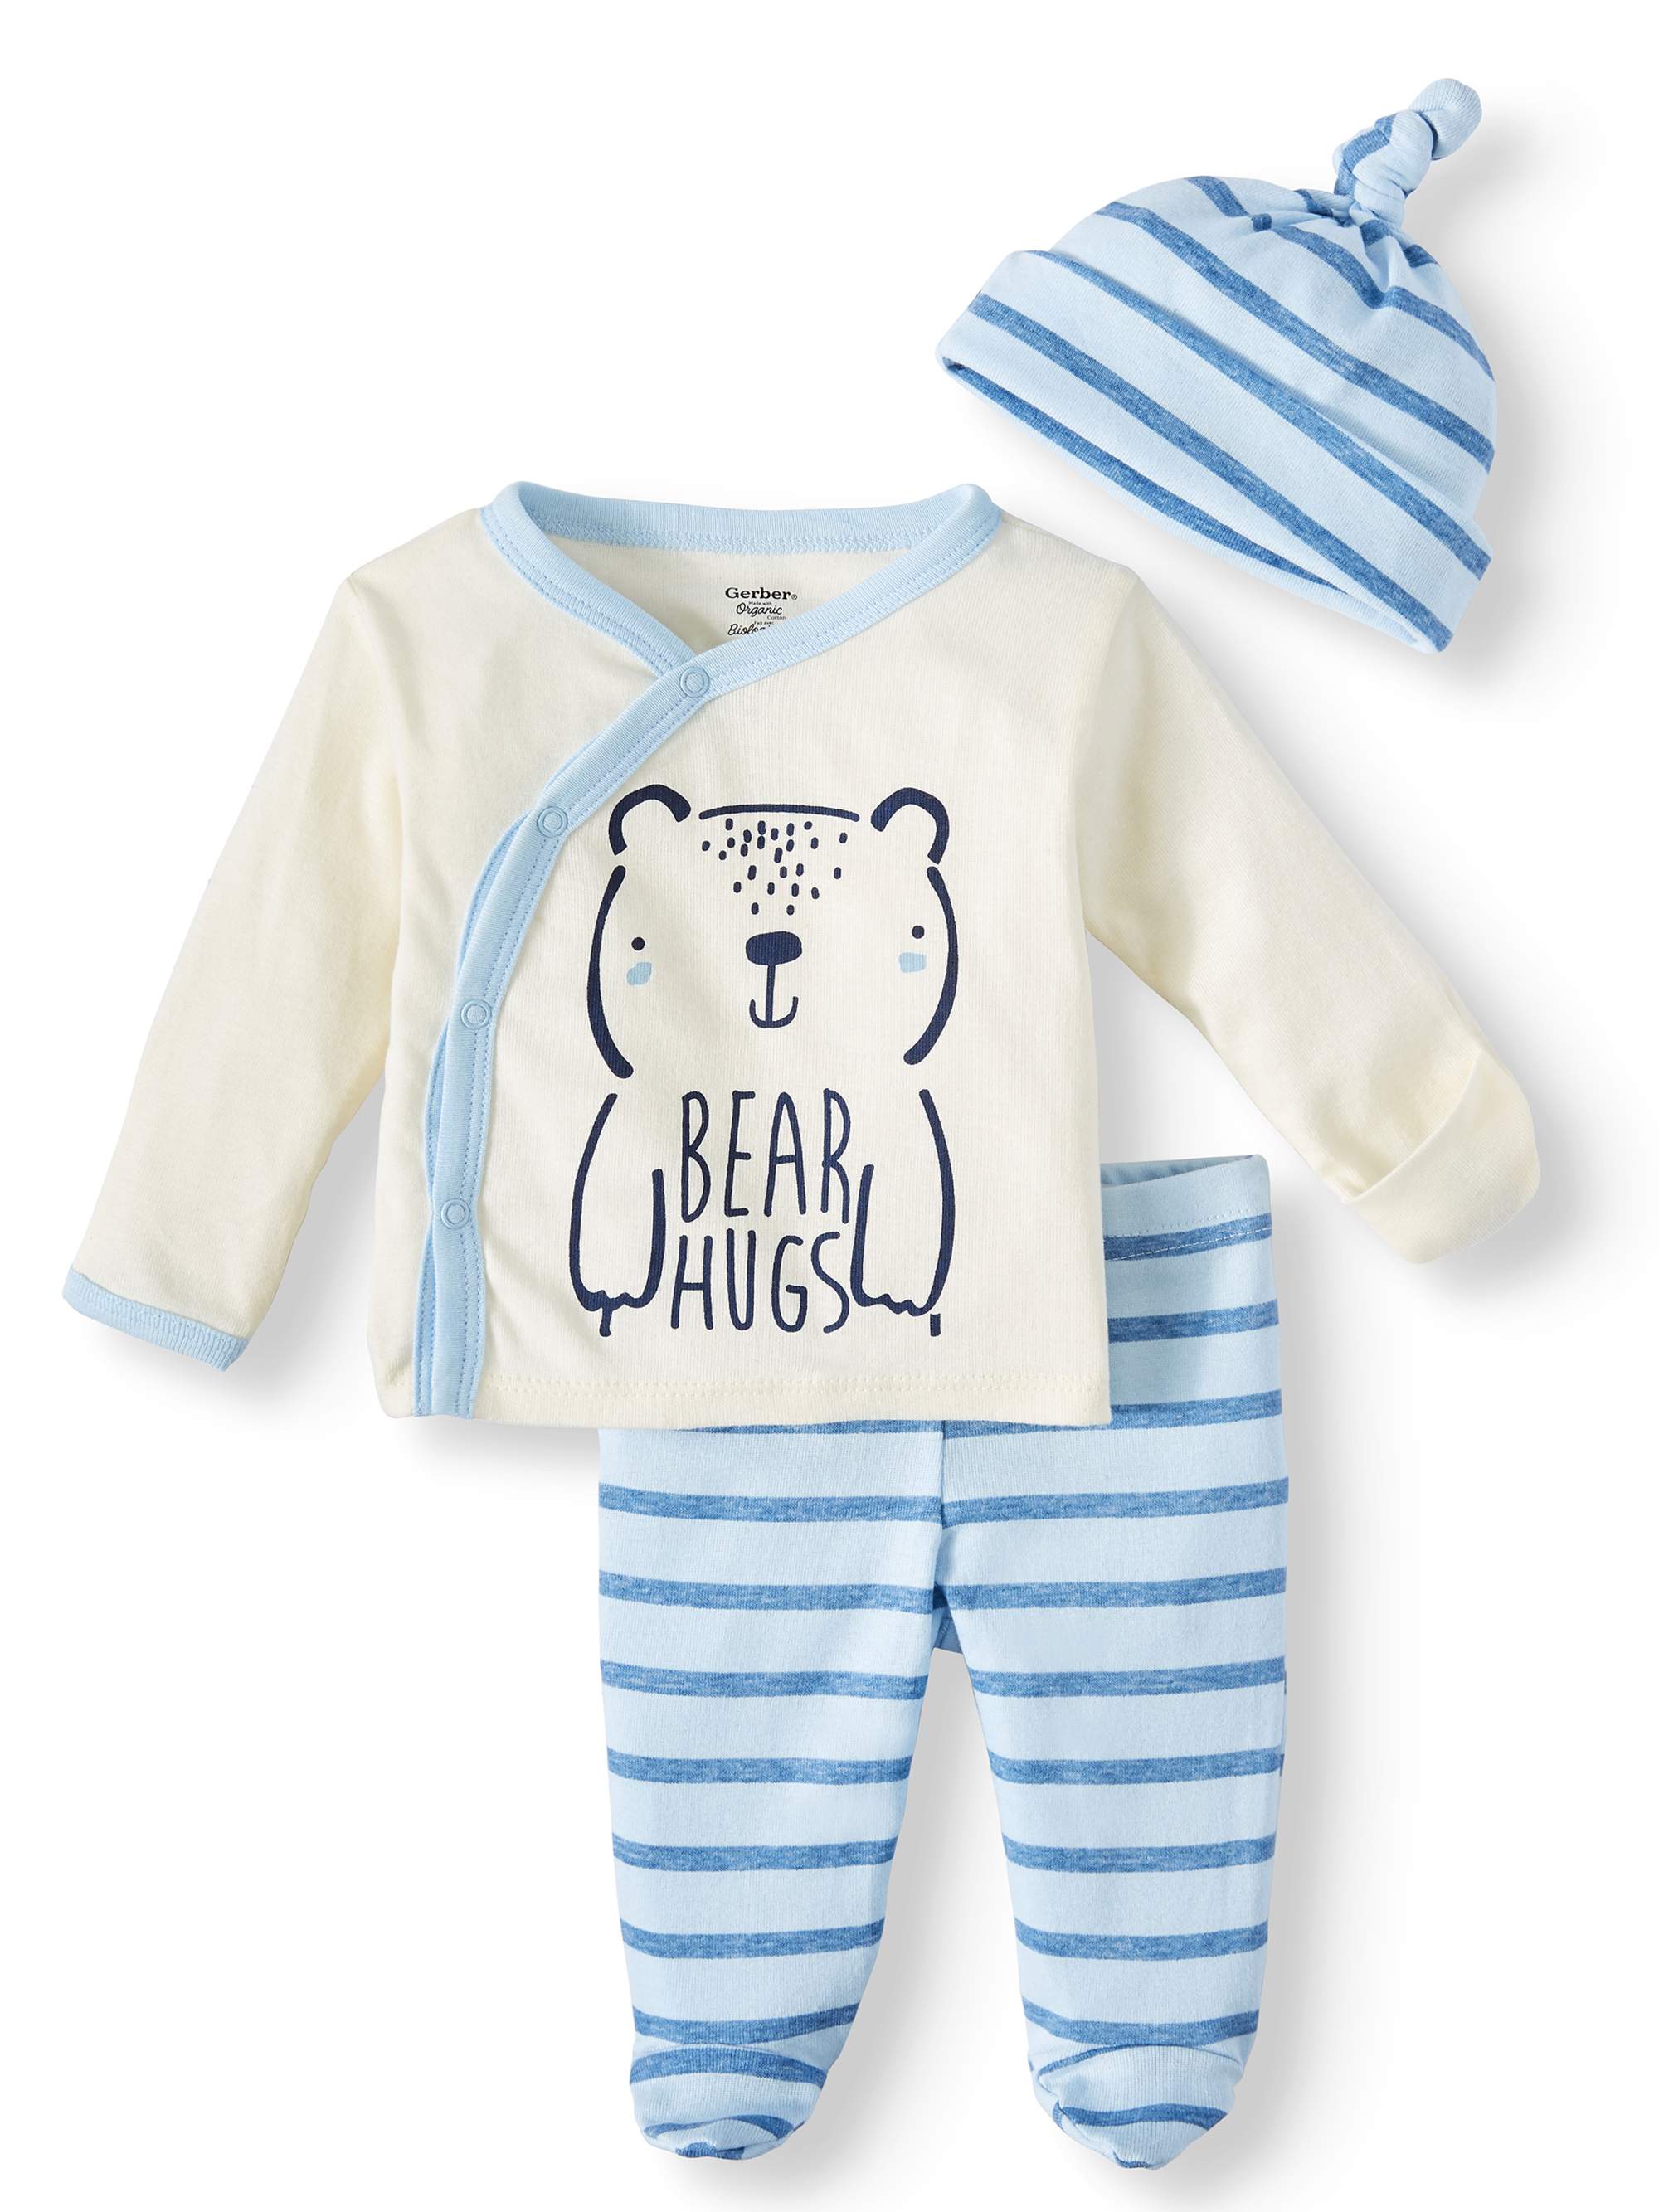 Gerber Baby Boy Organic Cotton Take Me Home Outfit Set, 3-Piece - image 1 of 4